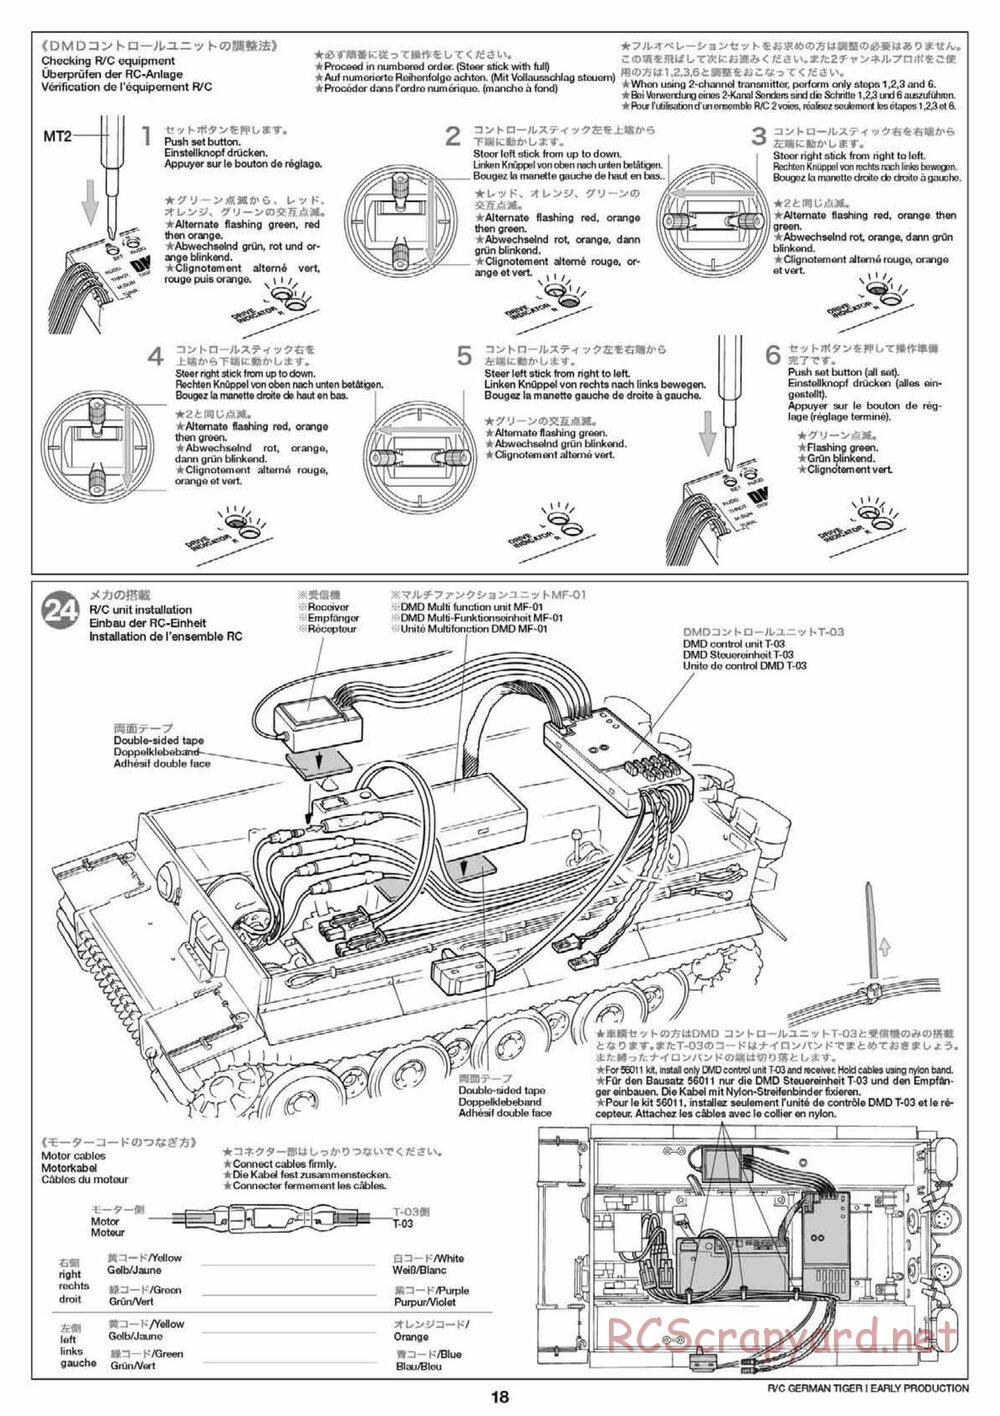 Tamiya - Tiger I Early Production - 1/16 Scale Chassis - Manual - Page 18